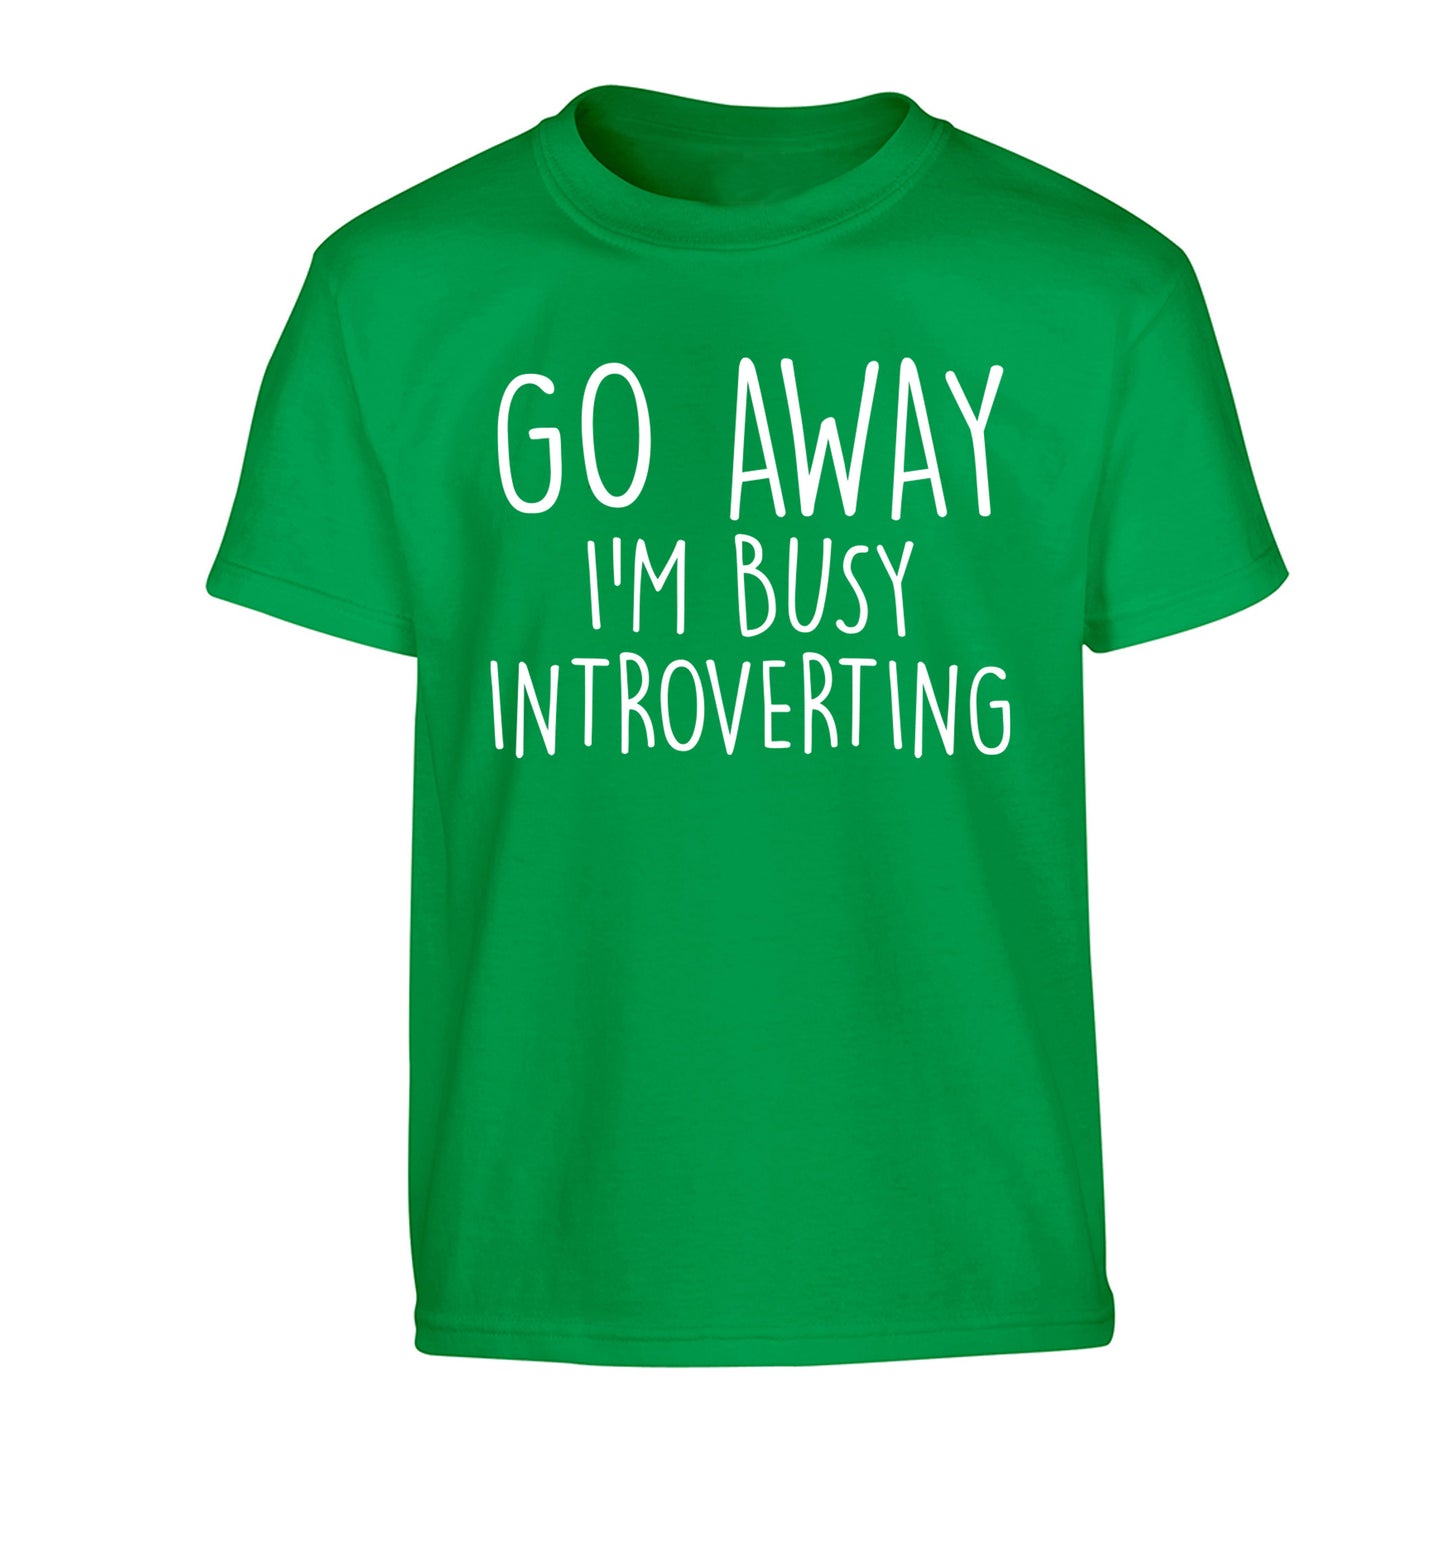 Go away I'm busy introverting Children's green Tshirt 12-13 Years